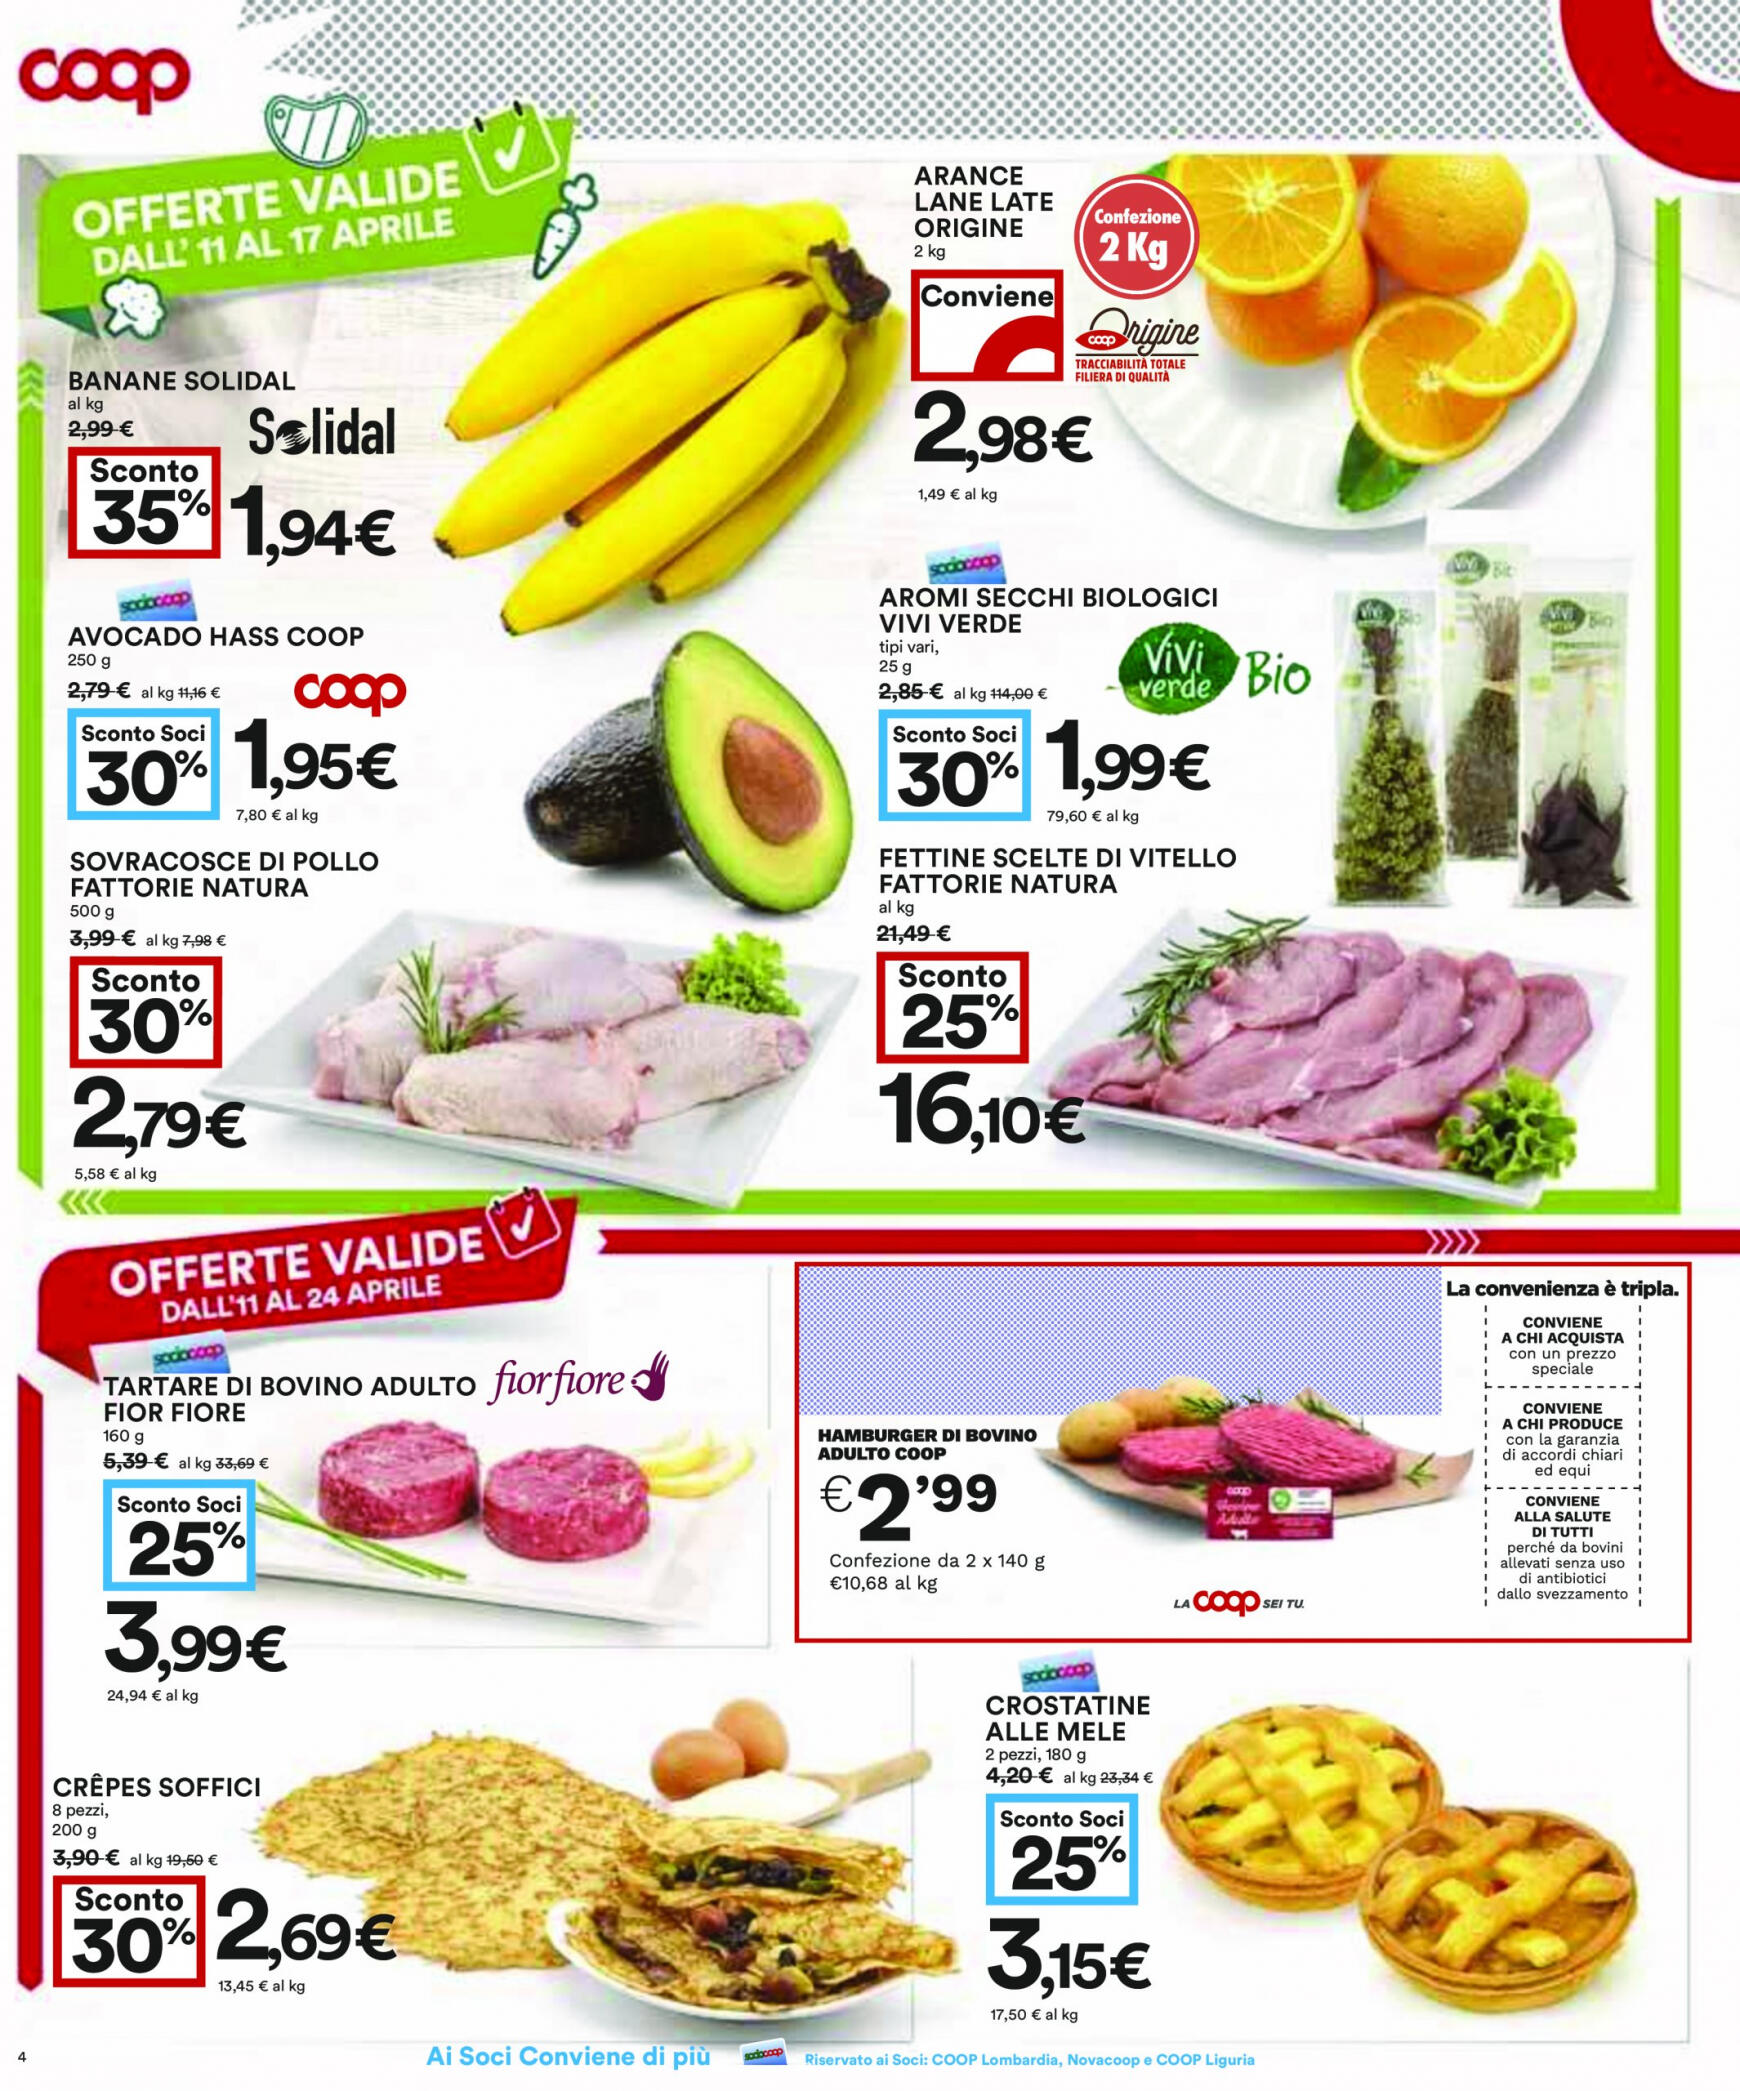 coop - Nuovo volantino Coop 11.04. - 24.04. - page: 4